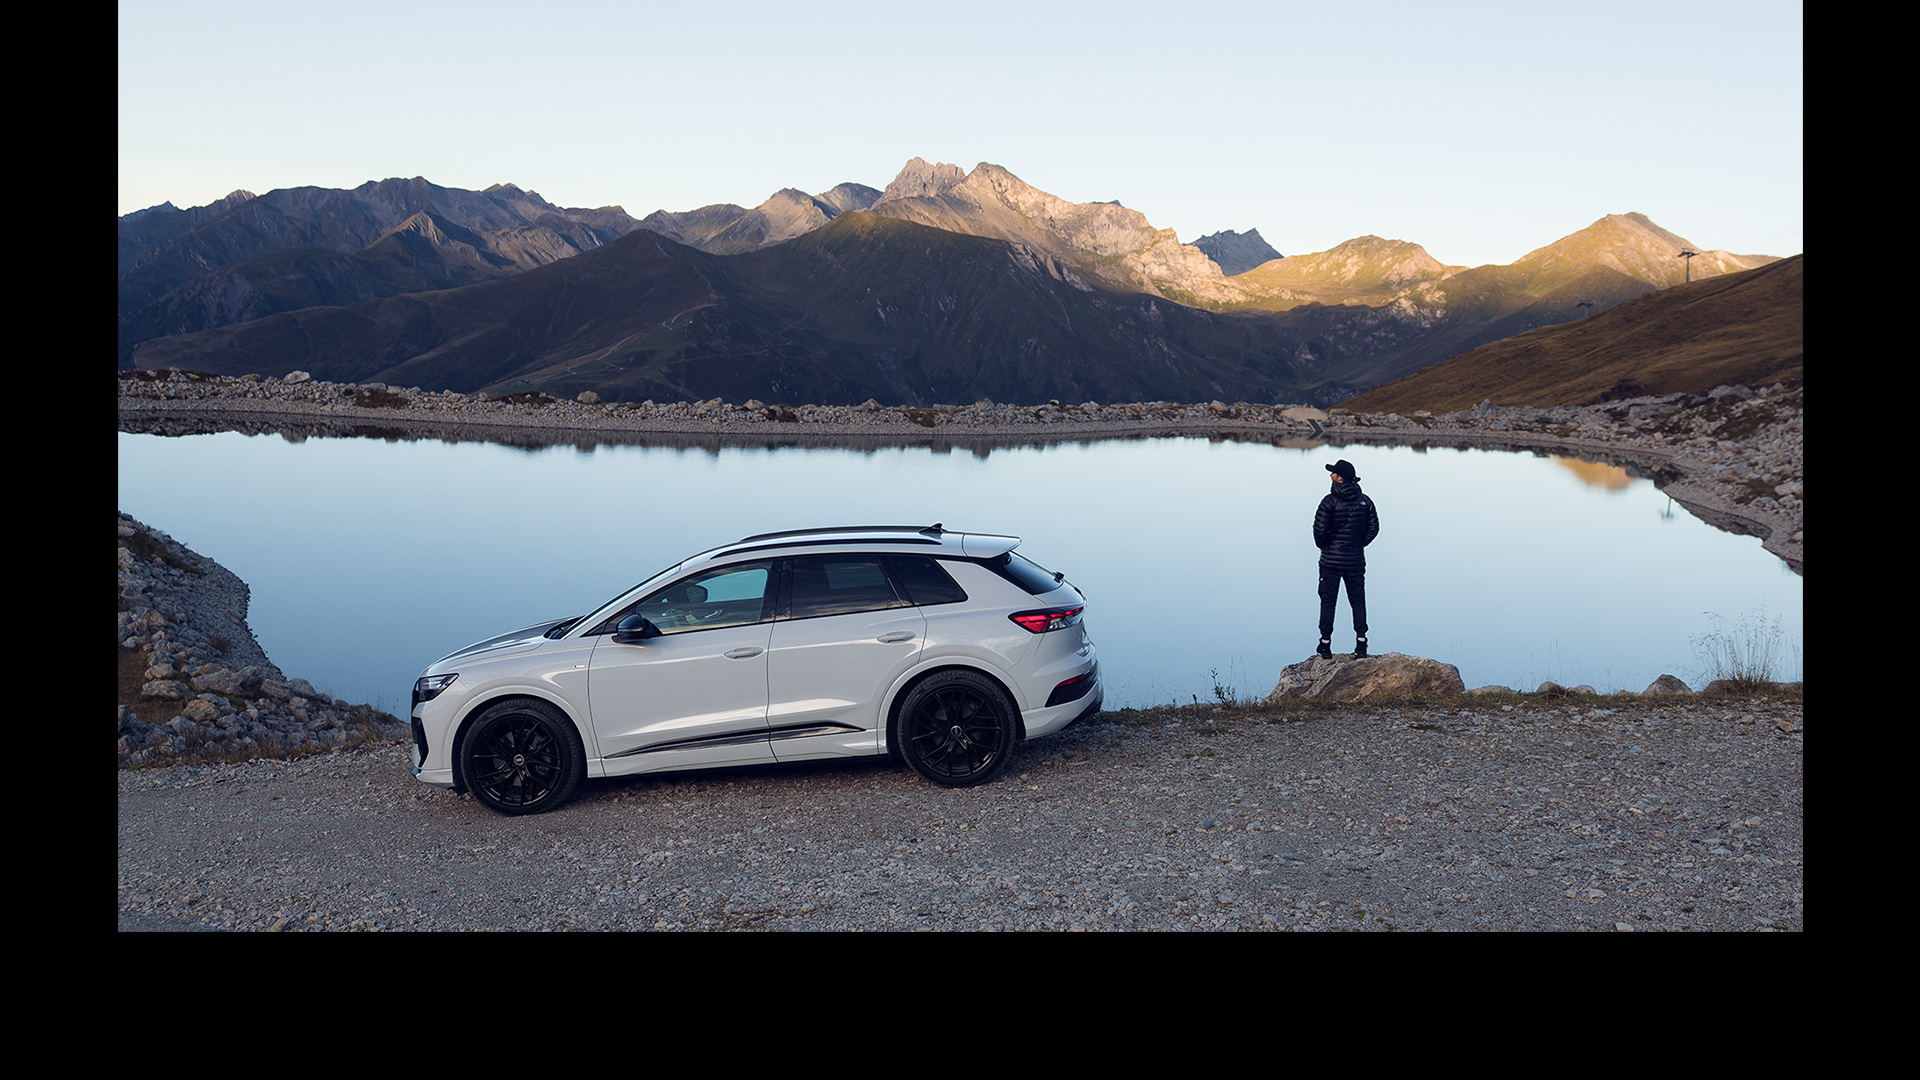 A white Audi Q4 e-tron stands in front of a lake.